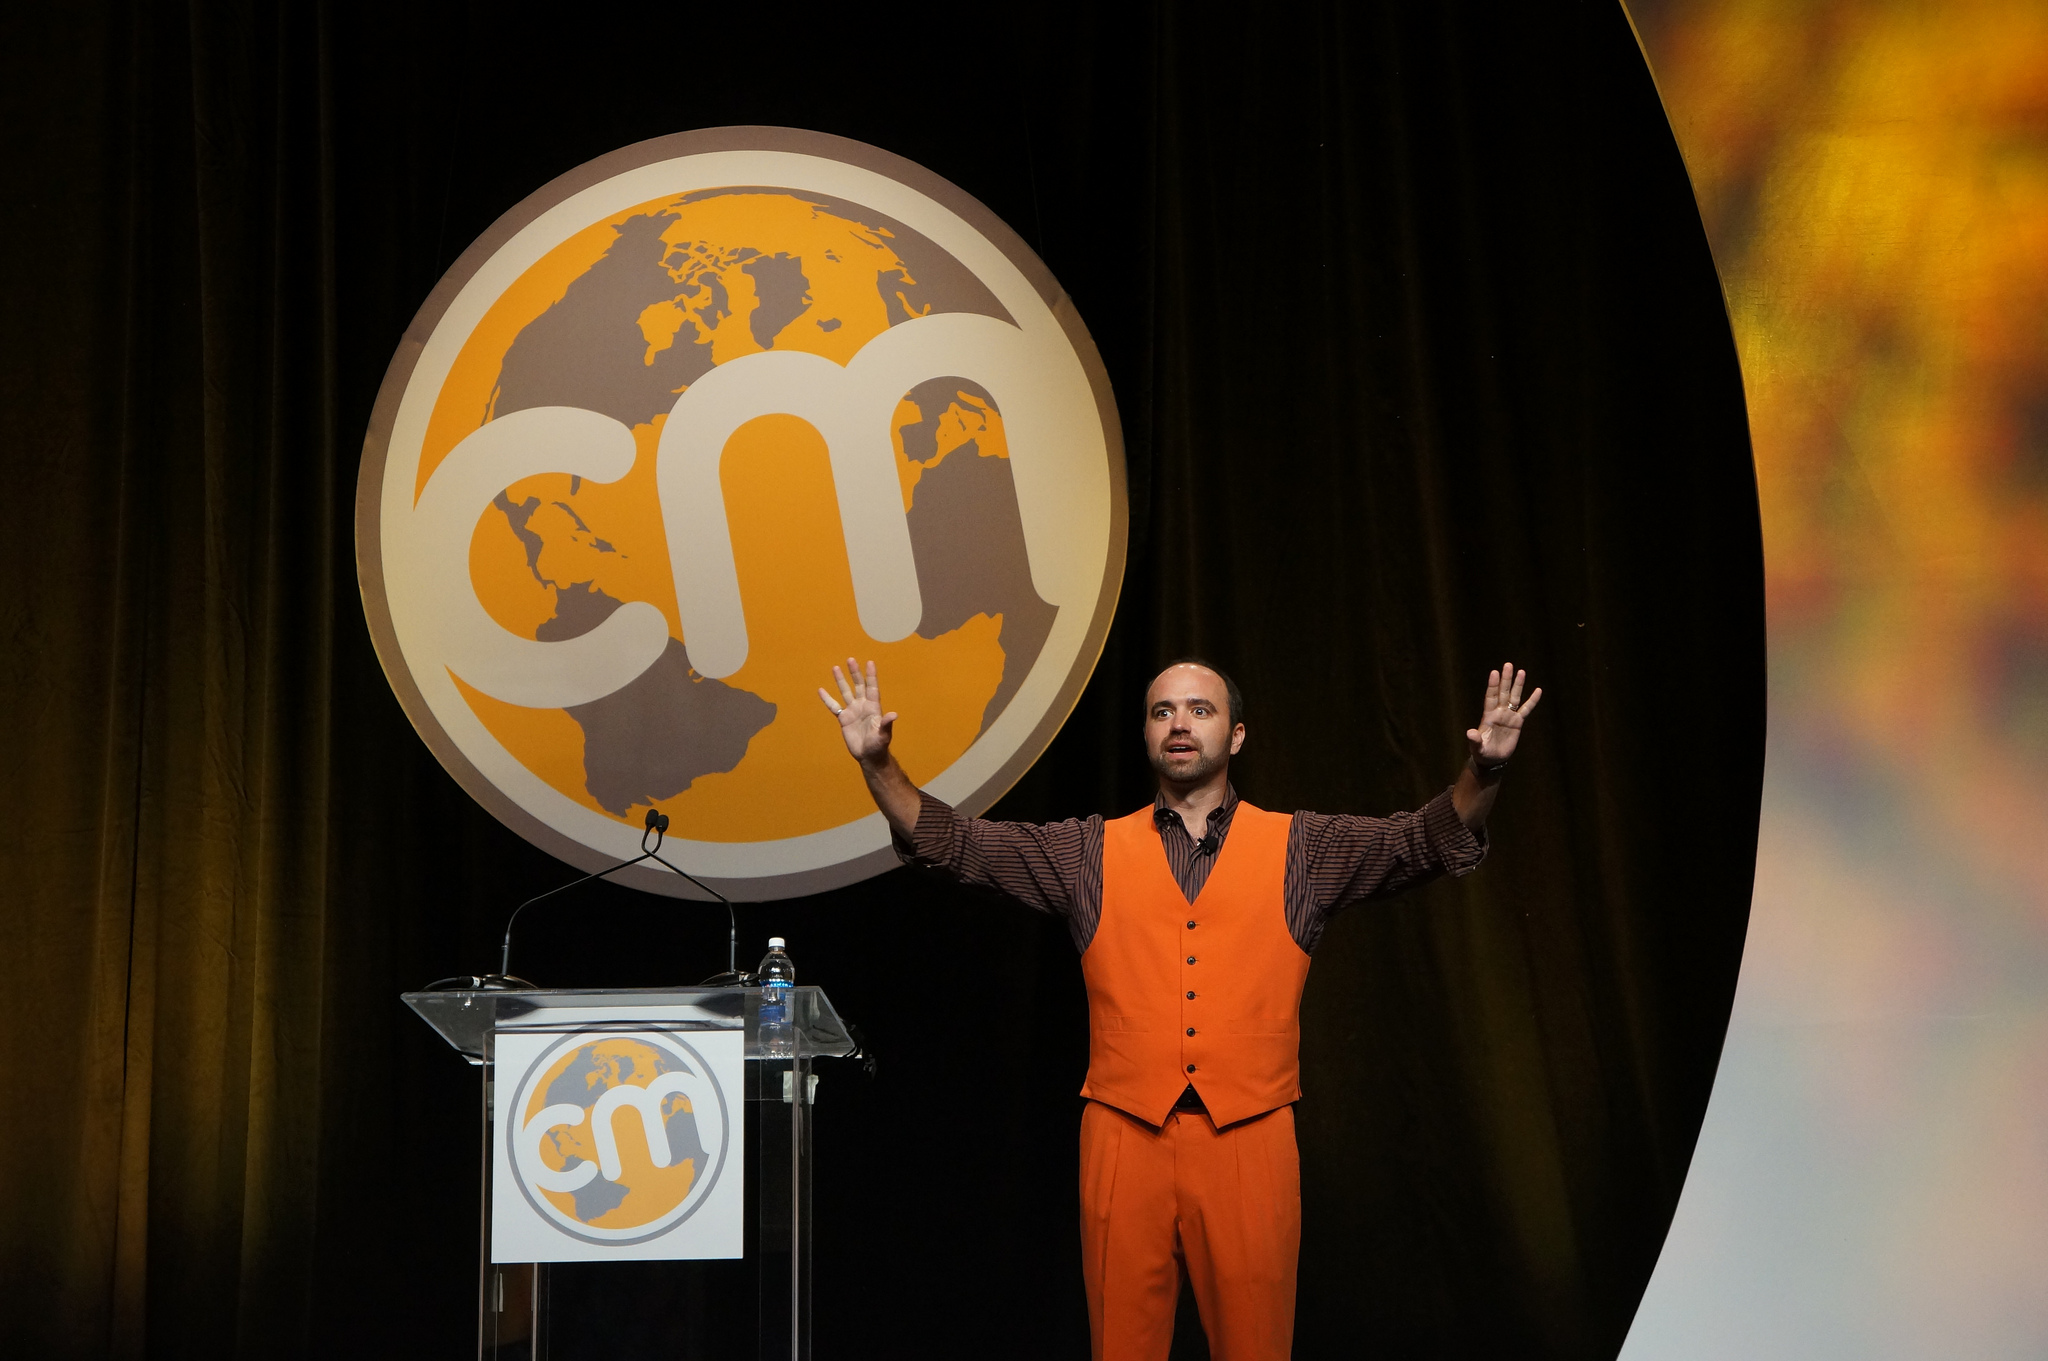 Joe Pulizzi speaking at his conference, Content Marketing World, published as part of "The Complete Guide to Content Marketing for Small Business, Part 1: Finding Your Niche"